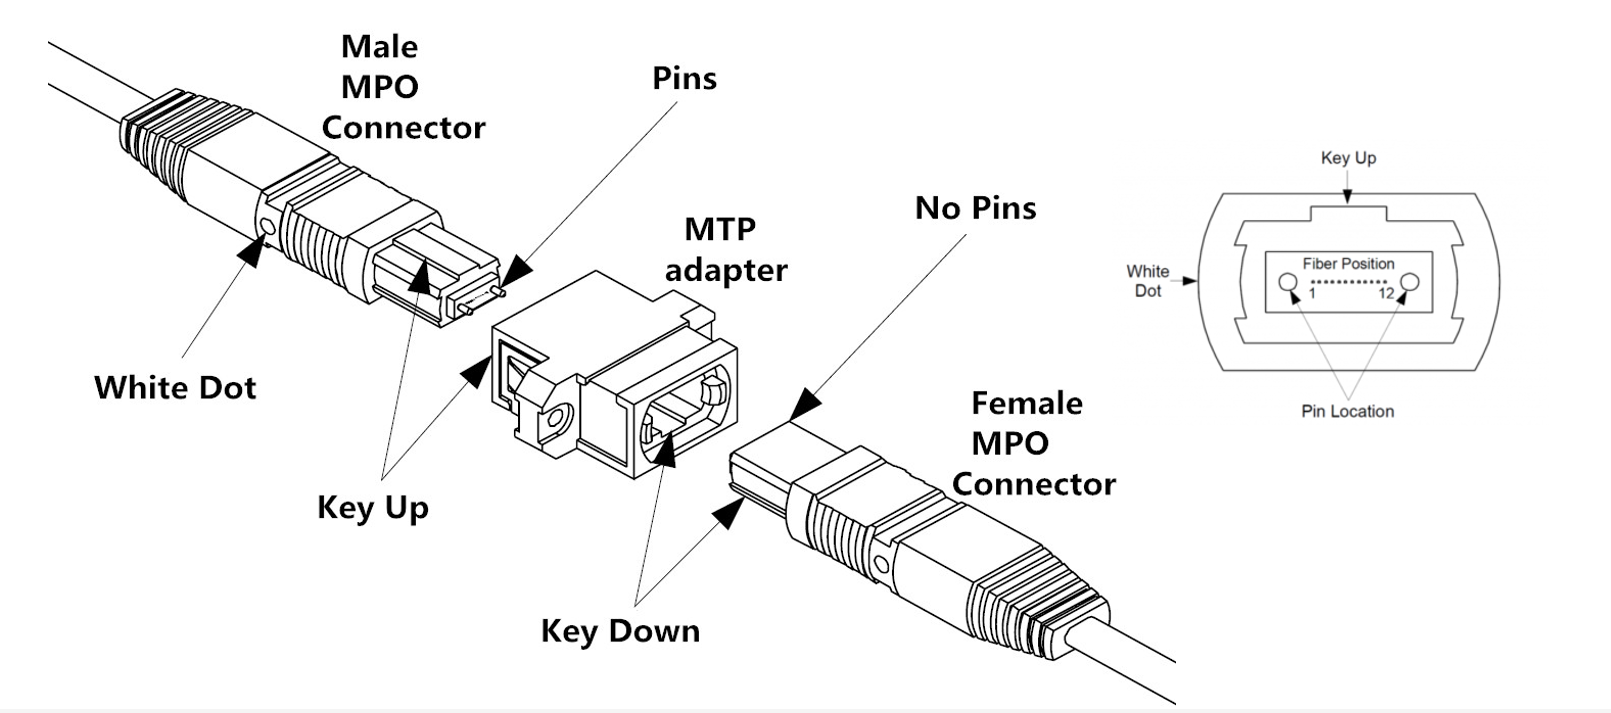 Diagram showing how male and female MPO connectors align by key dot positions